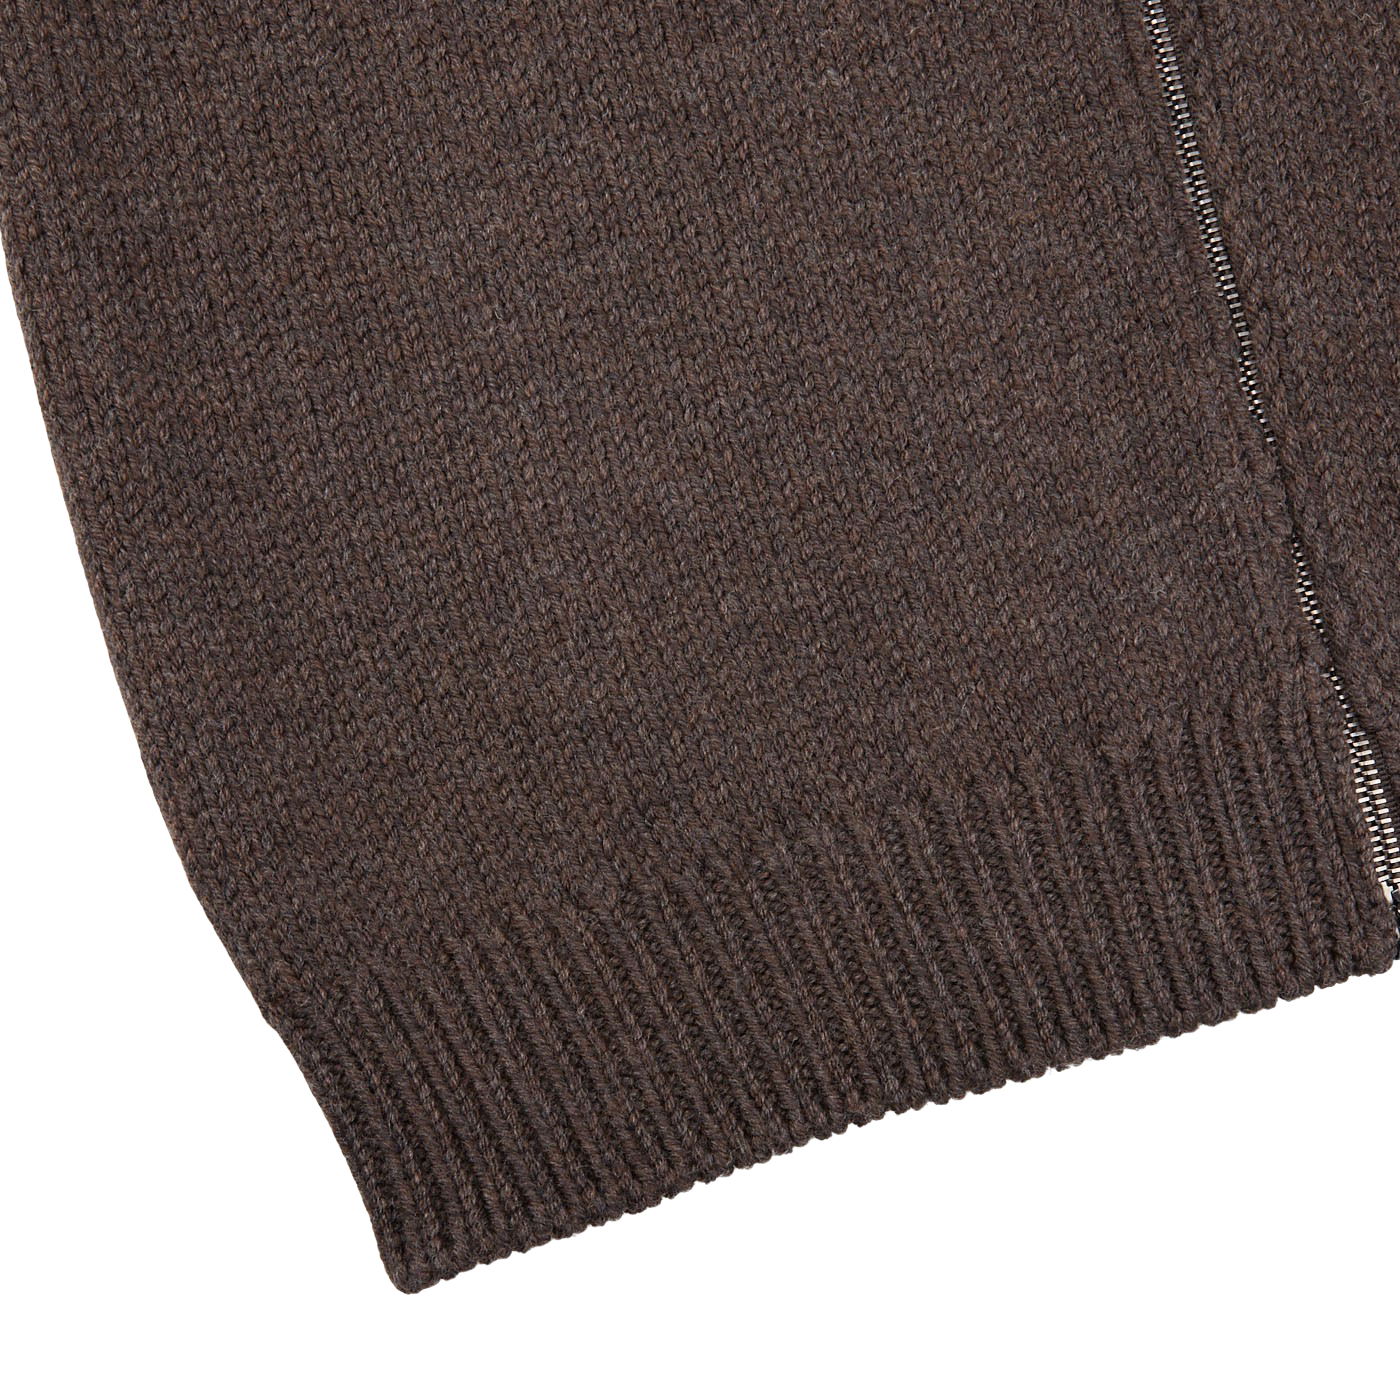 A close up of a Dark Brown Heavy Wool Maxim Zip Jacket by Massimo Alba.